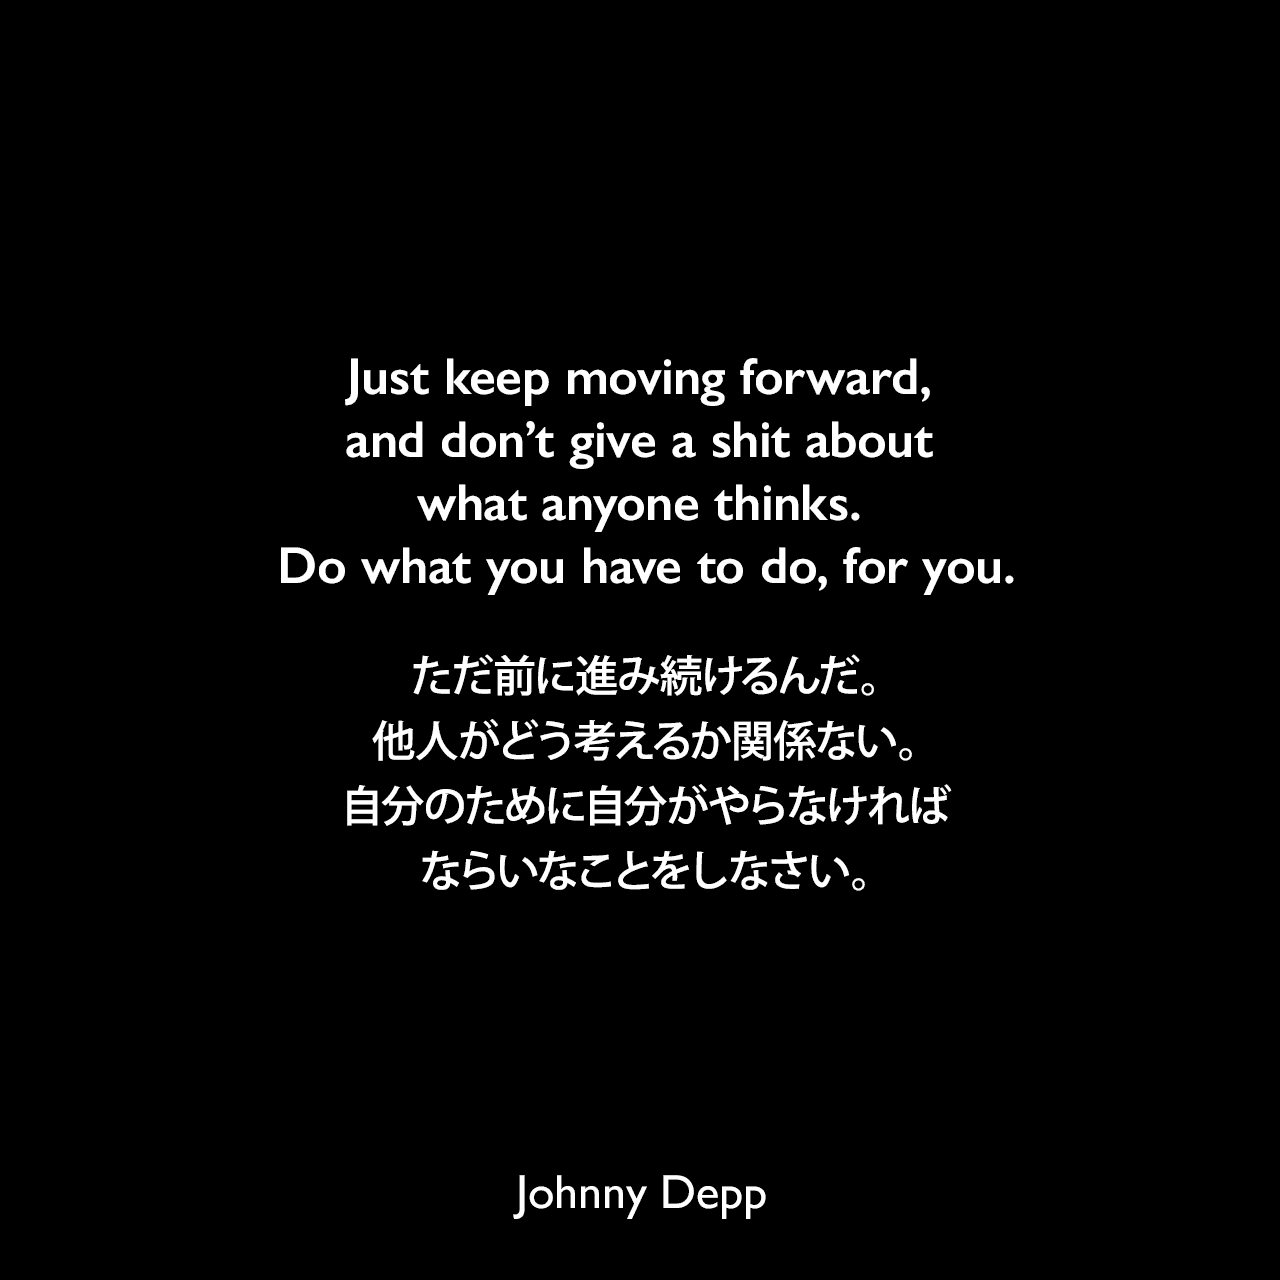 Just keep moving forward, and don’t give a shit about what anyone thinks. Do what you have to do, for you.ただ前に進み続けるんだ。他人がどう考えるか関係ない。自分のために自分がやらなければならいなことをしなさい。Johnny Depp